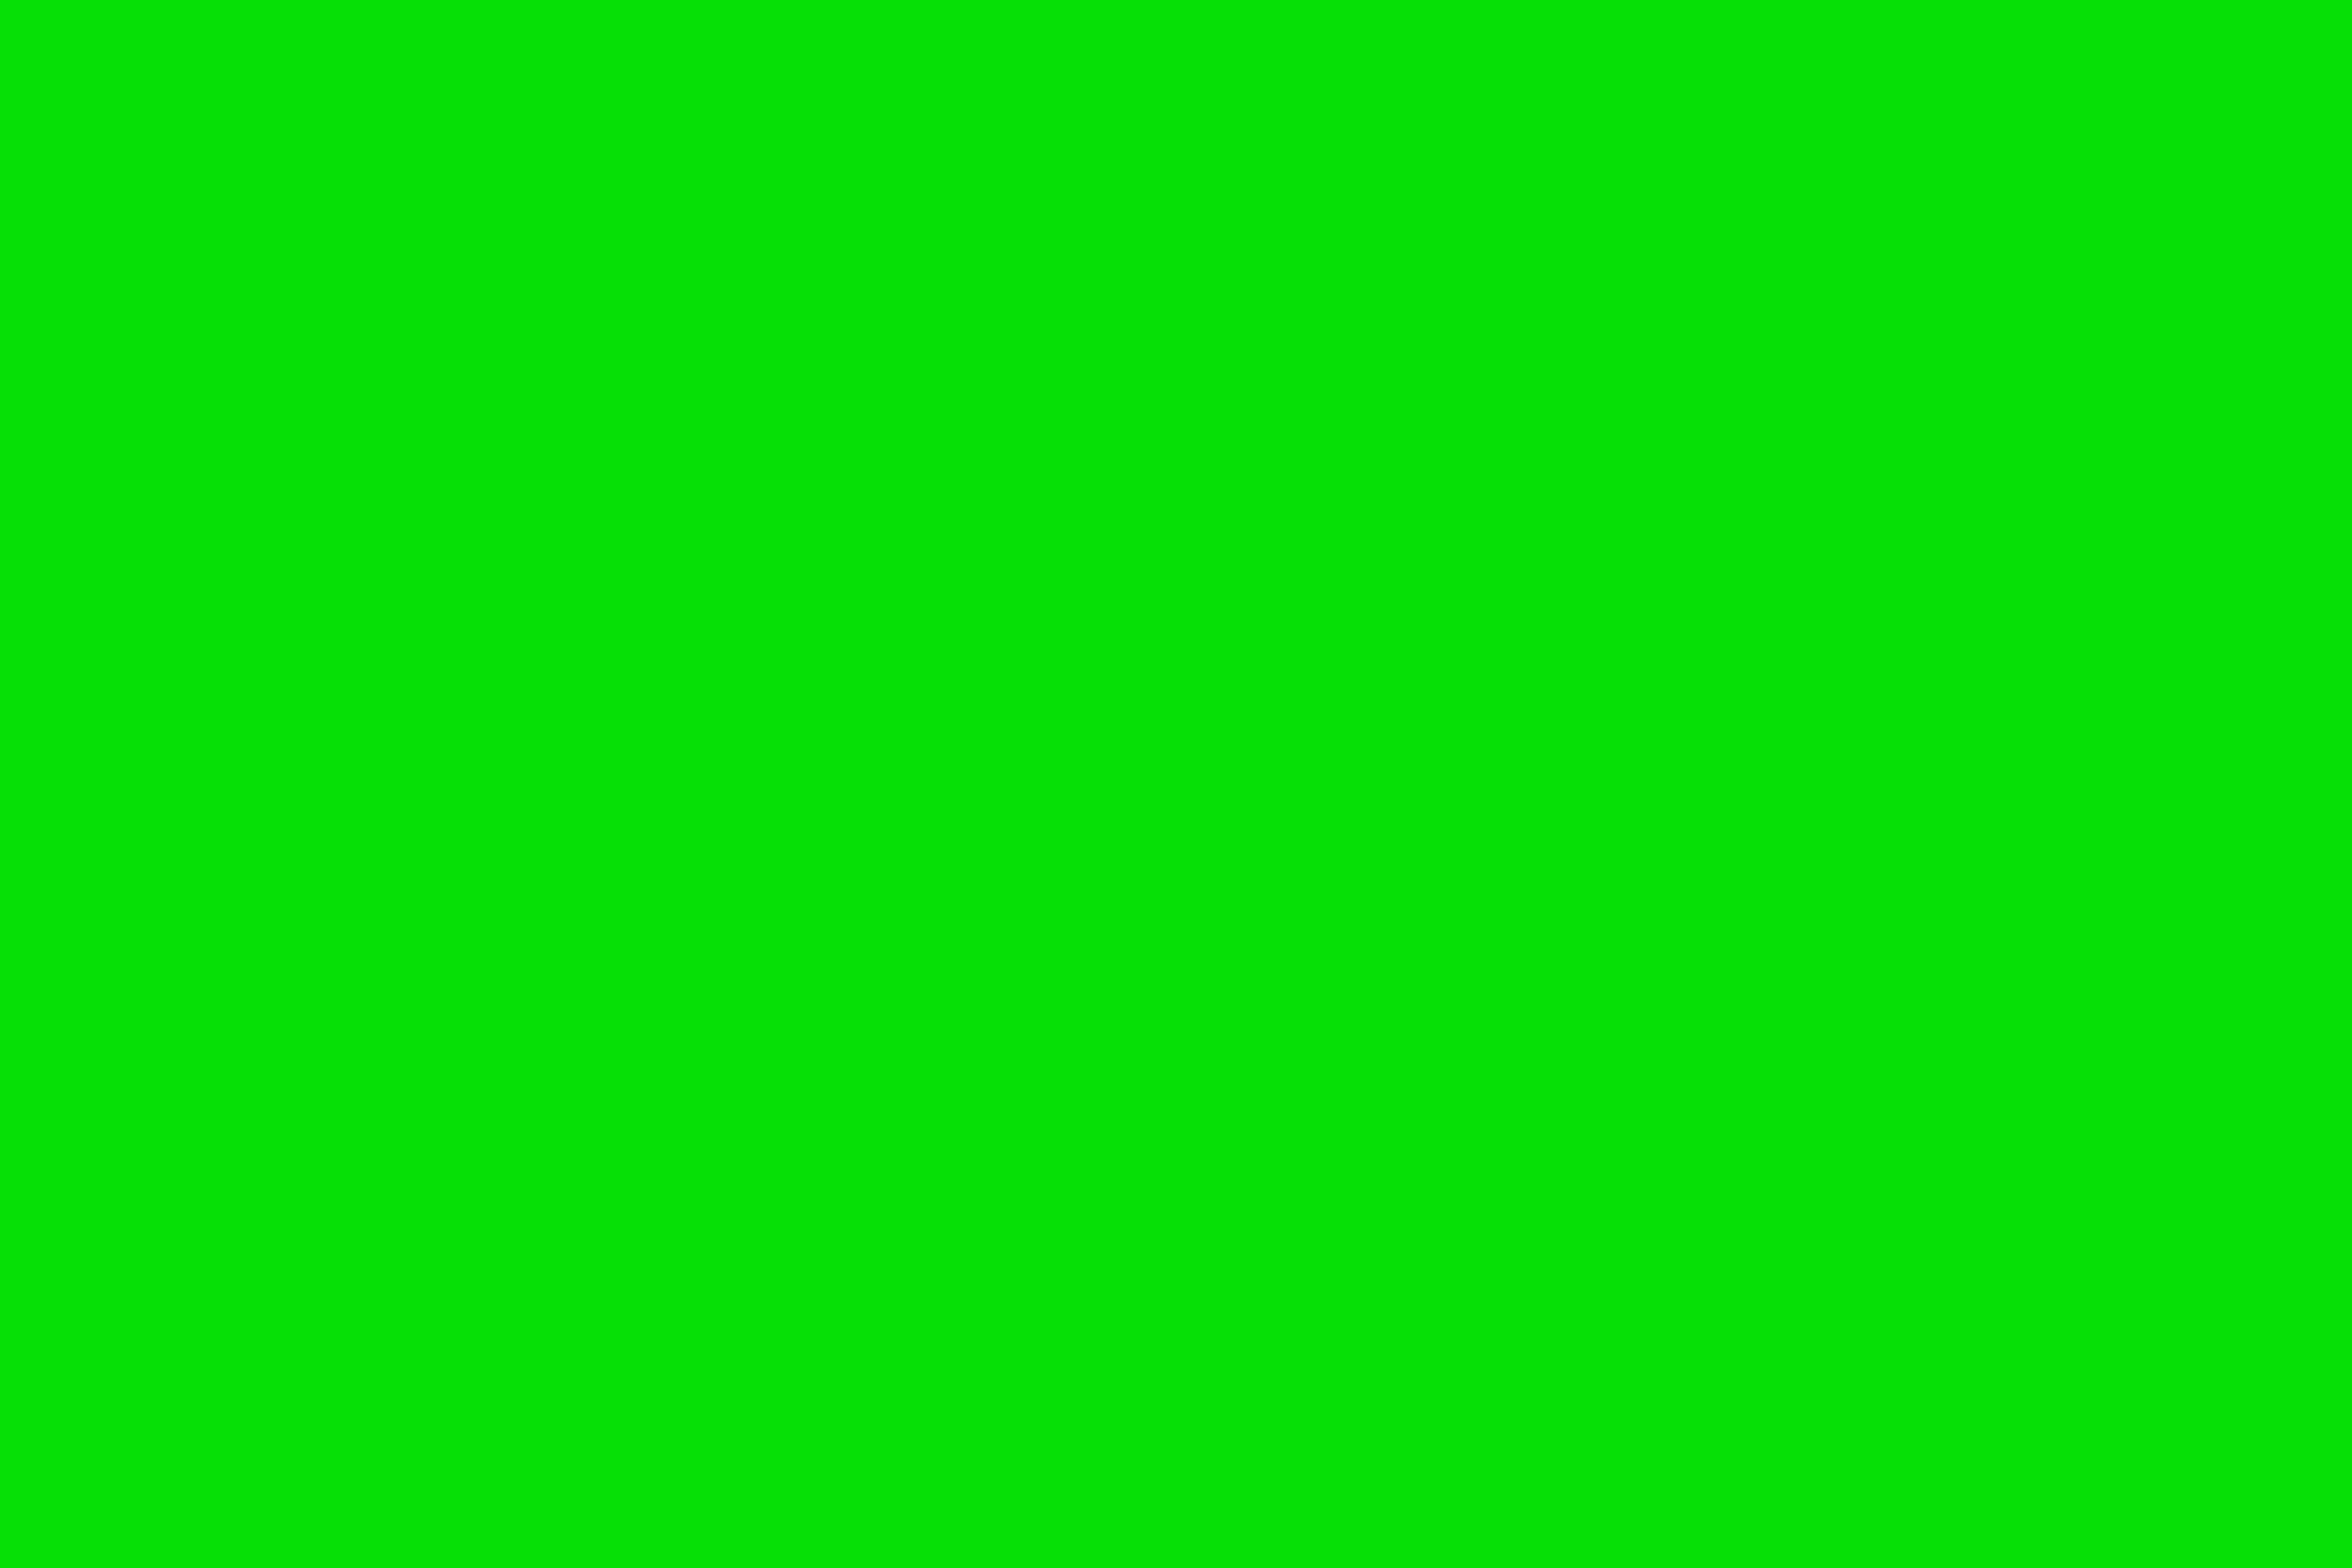 Green background for photo editing - vibrant and refreshing